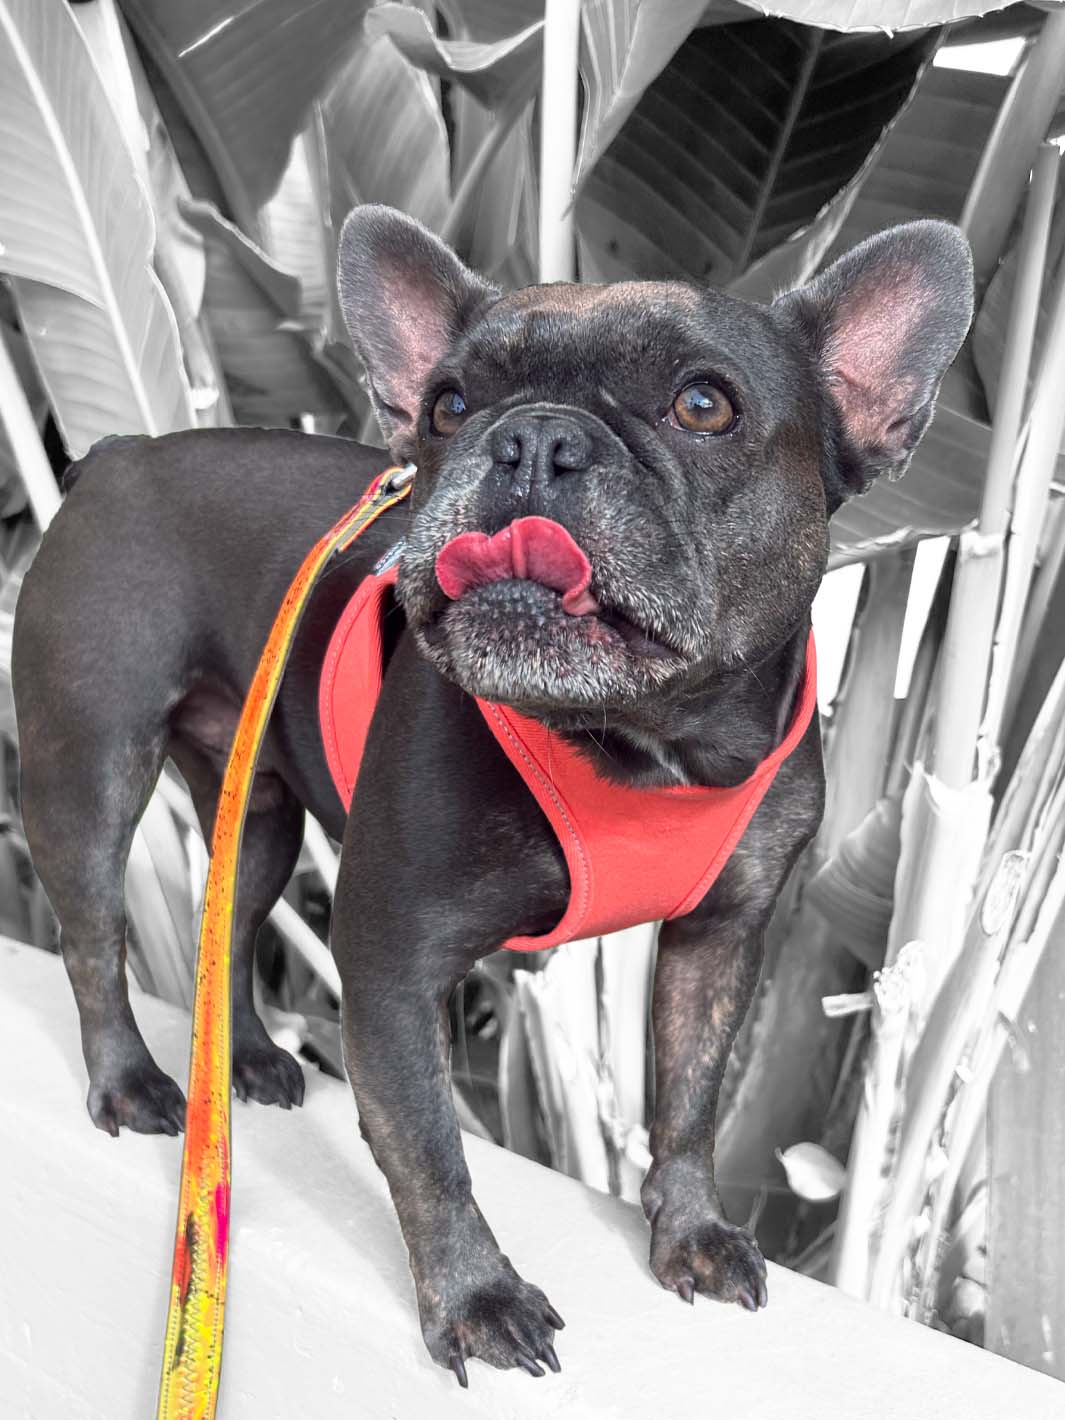 French bulldog puppy licks his lips and is wearing a limited edition denim vest style harness by MAGNUS Canis.